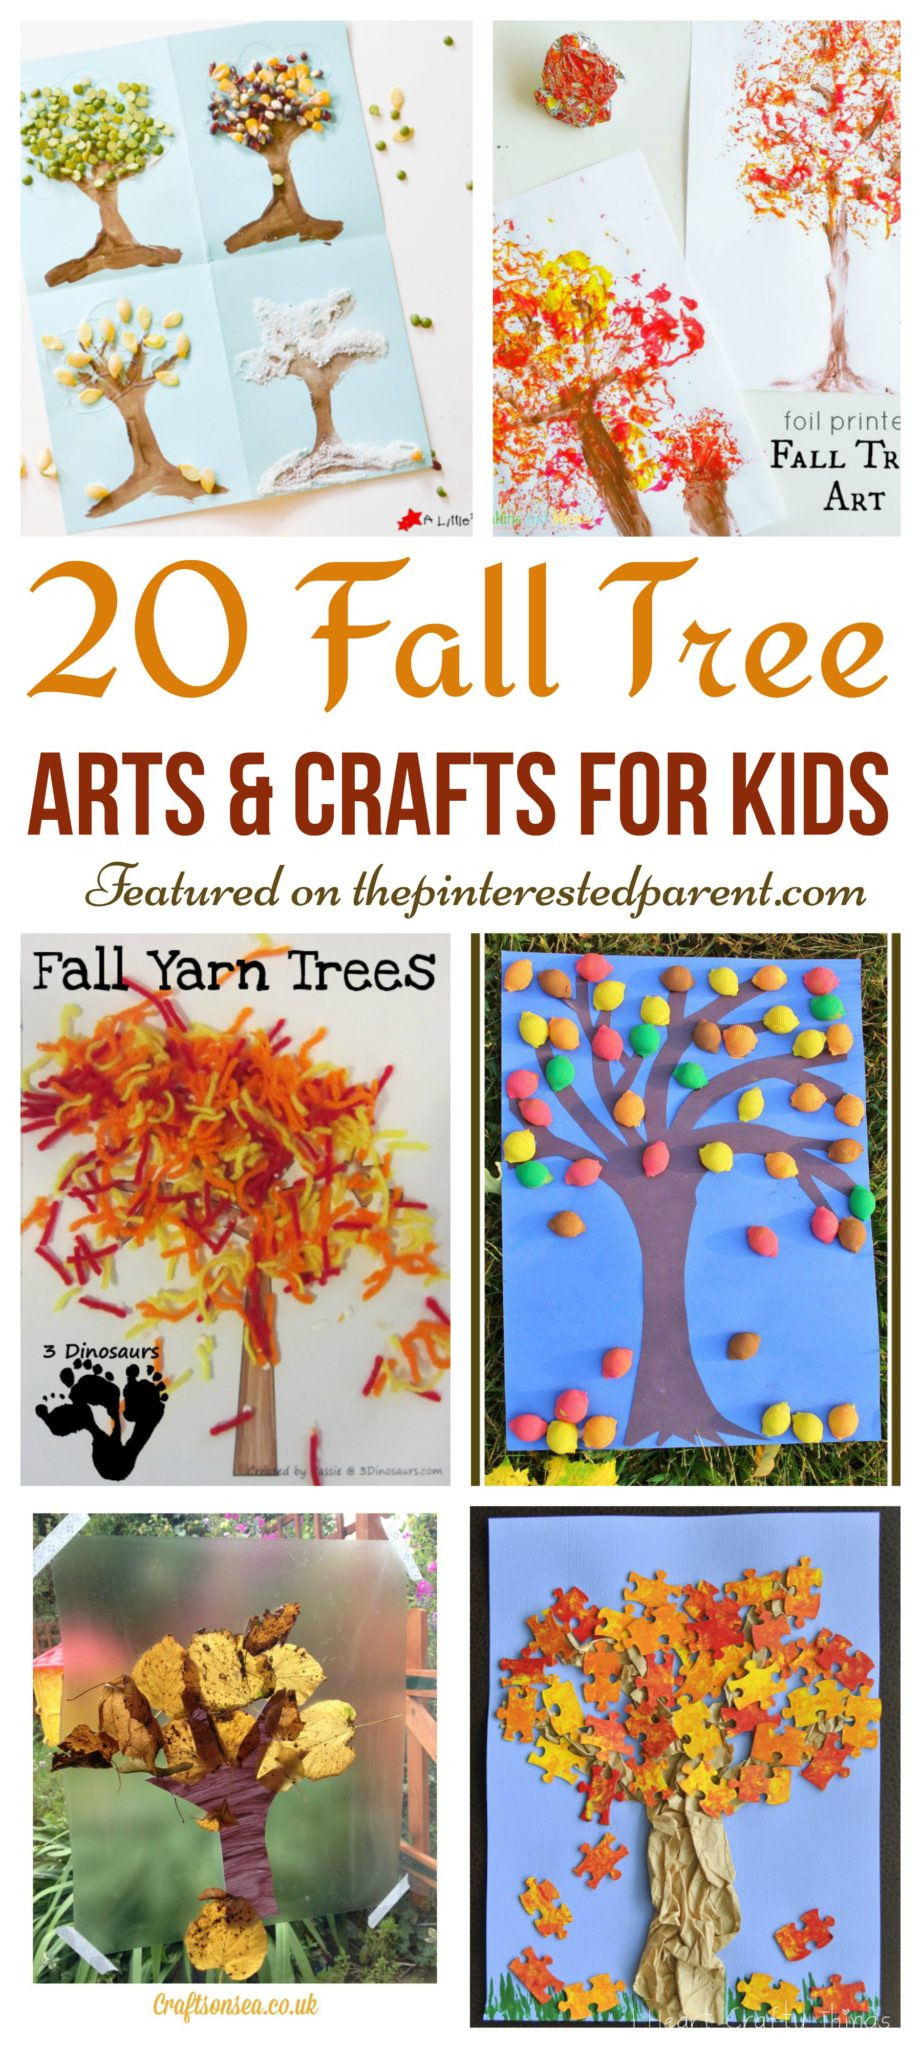 Fall Art Projects For Kids
 20 Fall Tree Arts & Crafts Ideas For Kids – The